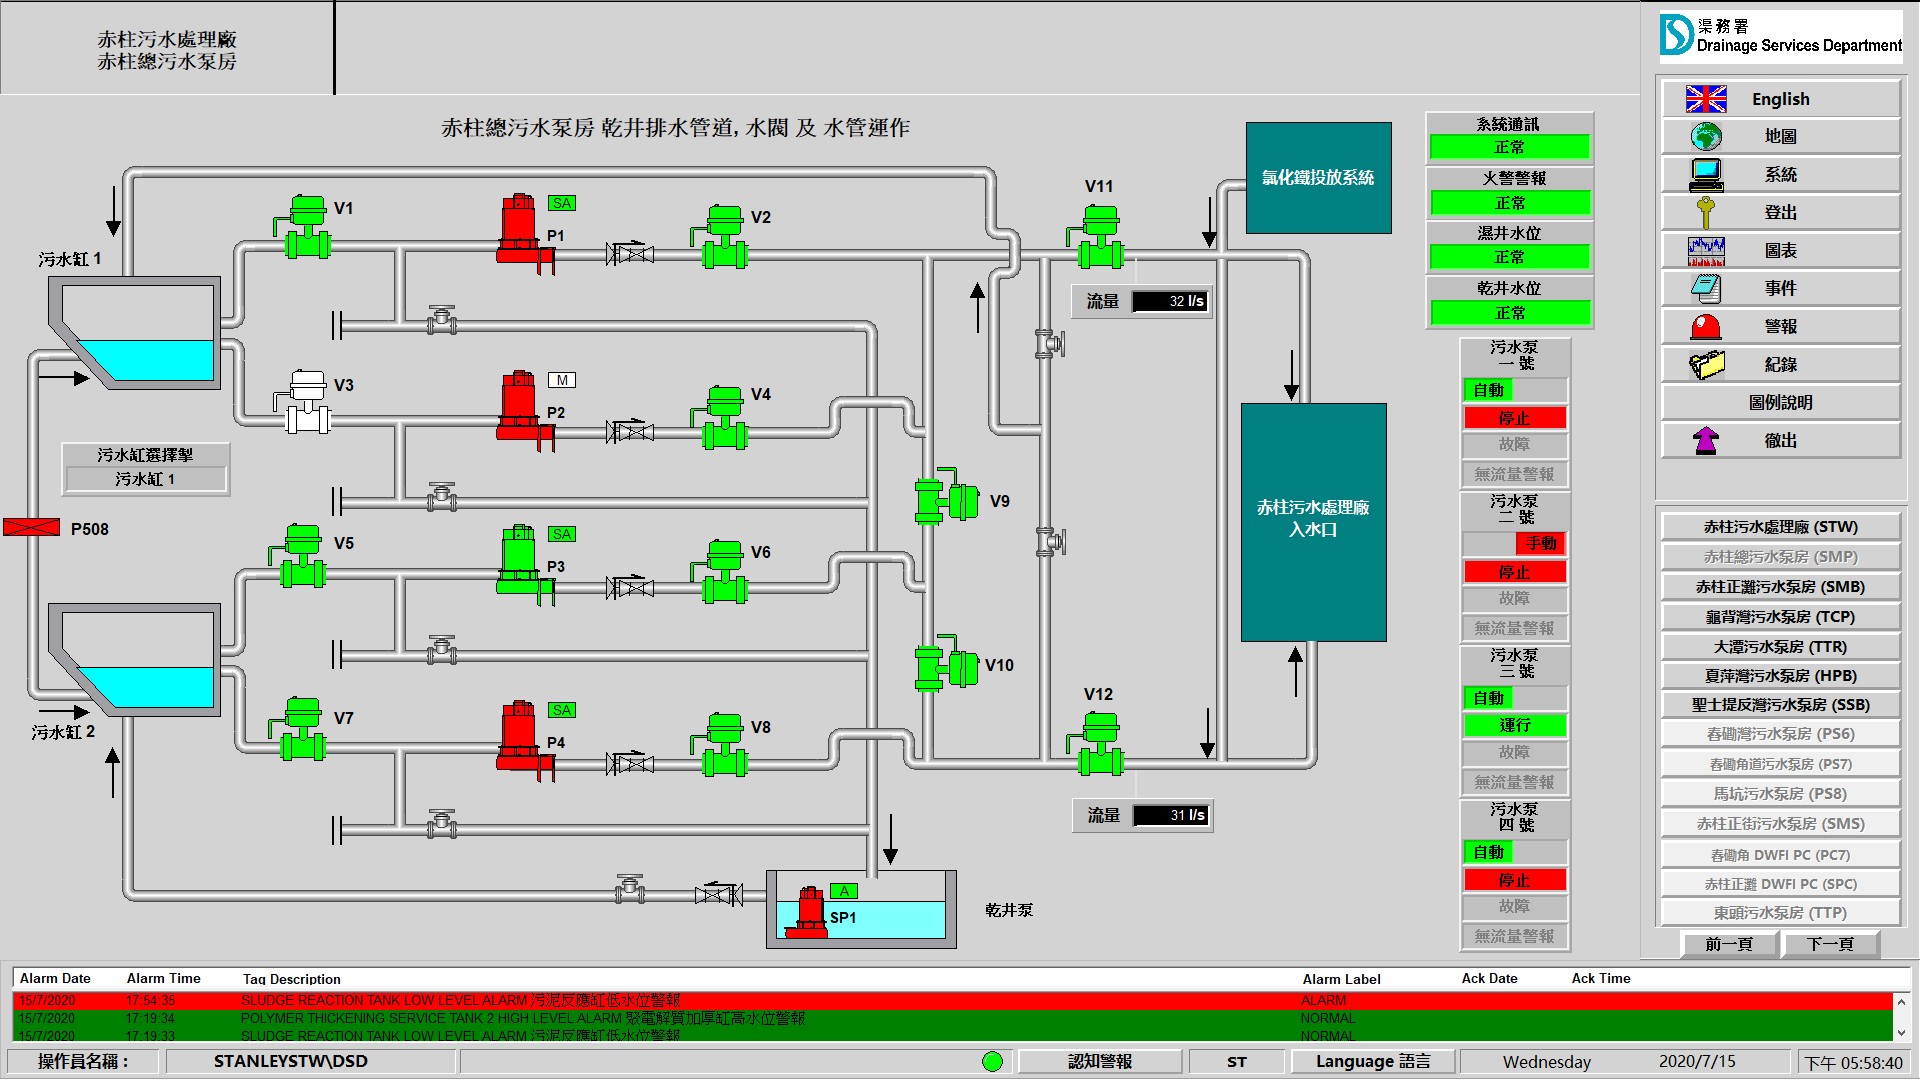 Stanley Main Sewage Pumping Station Valve status screenshot from FactoryTalk View After Works in DSD Stanley STW